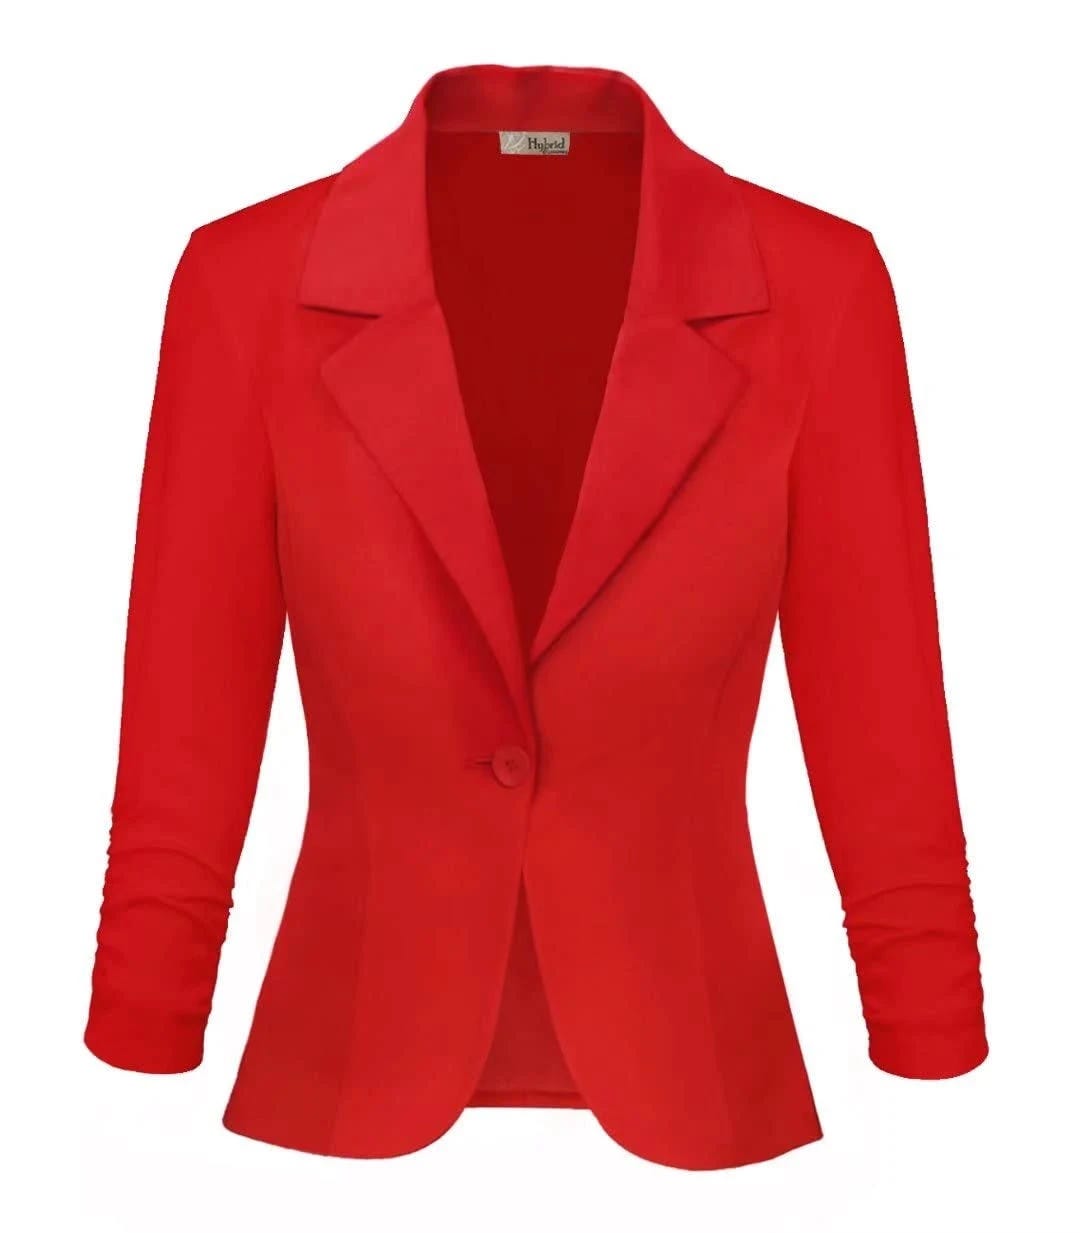 Red Women's Blazer Jacket: Versatile and Classy Casual Workwear | Image